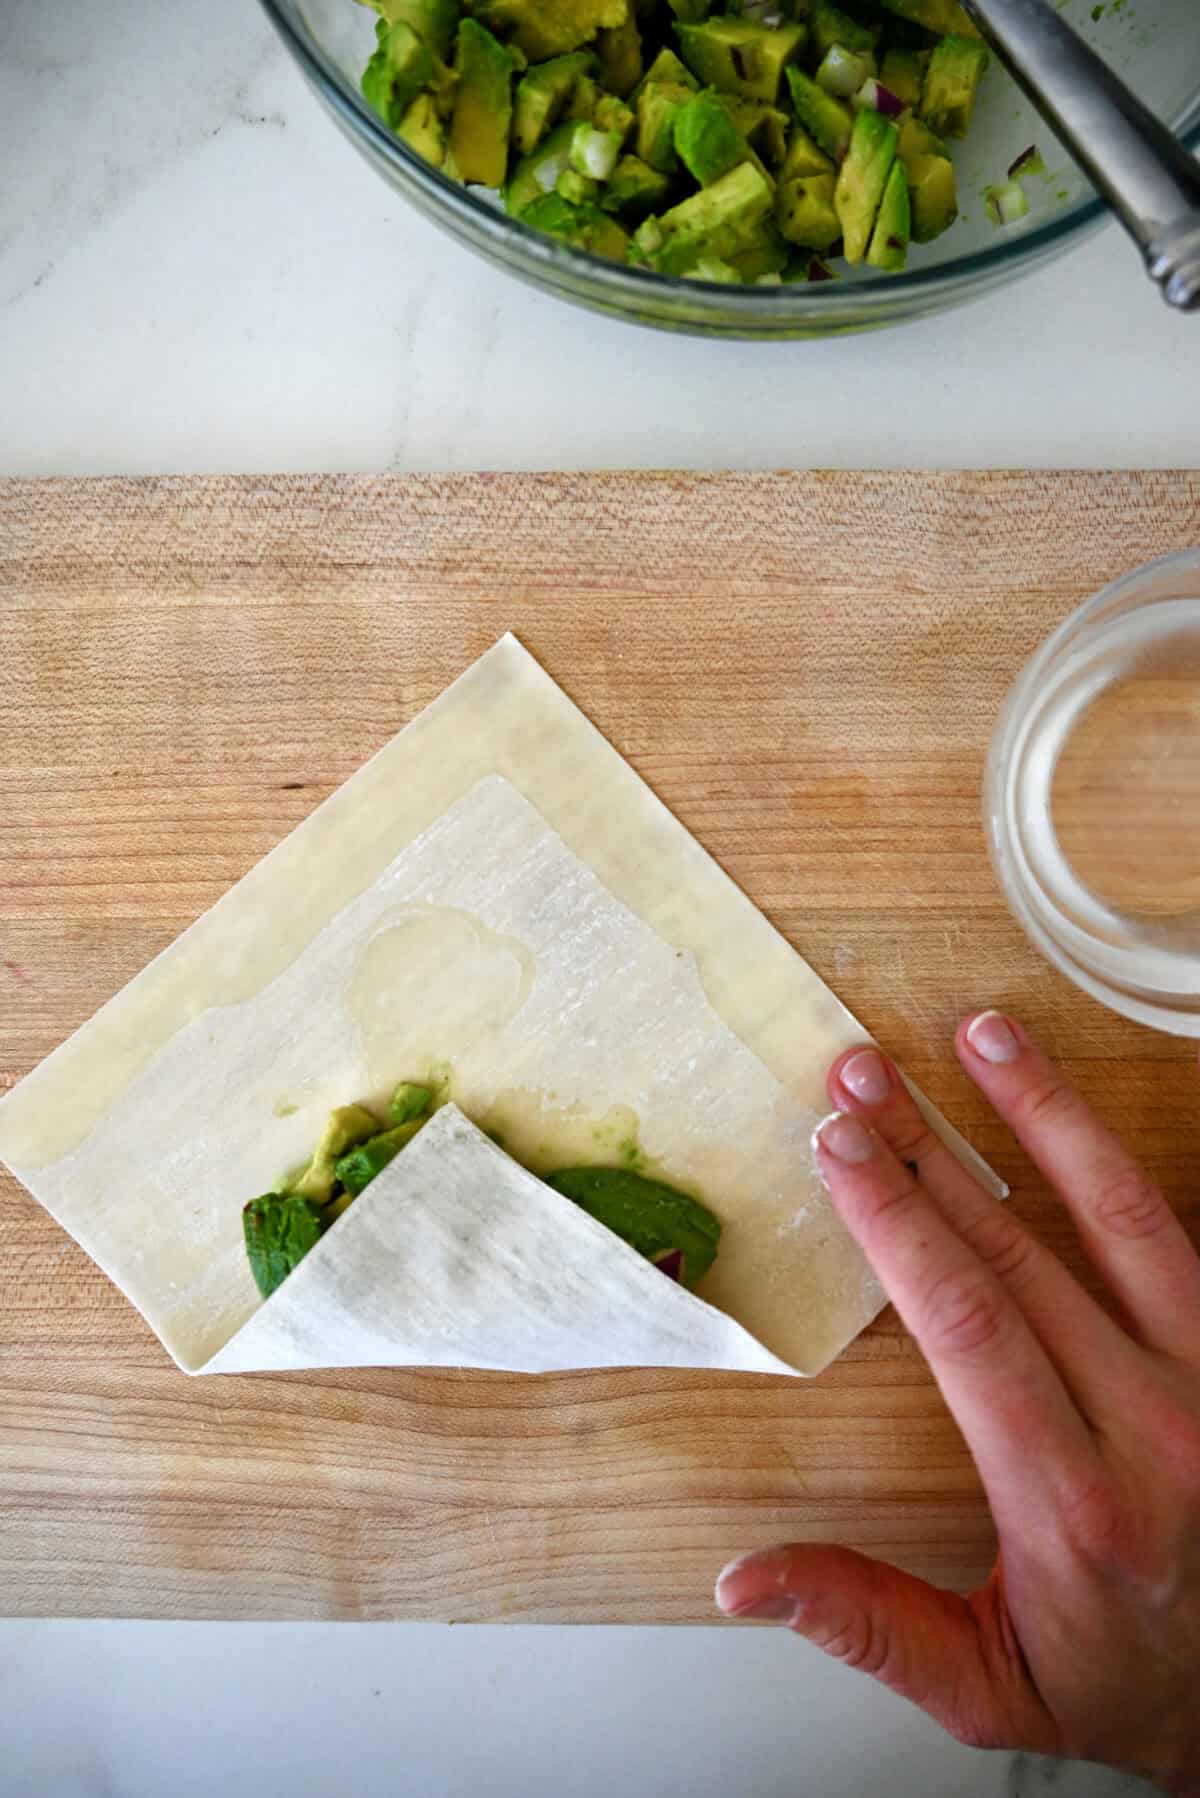 The first fold to making an egg roll, the bottom portion is folded over an avocado filling.